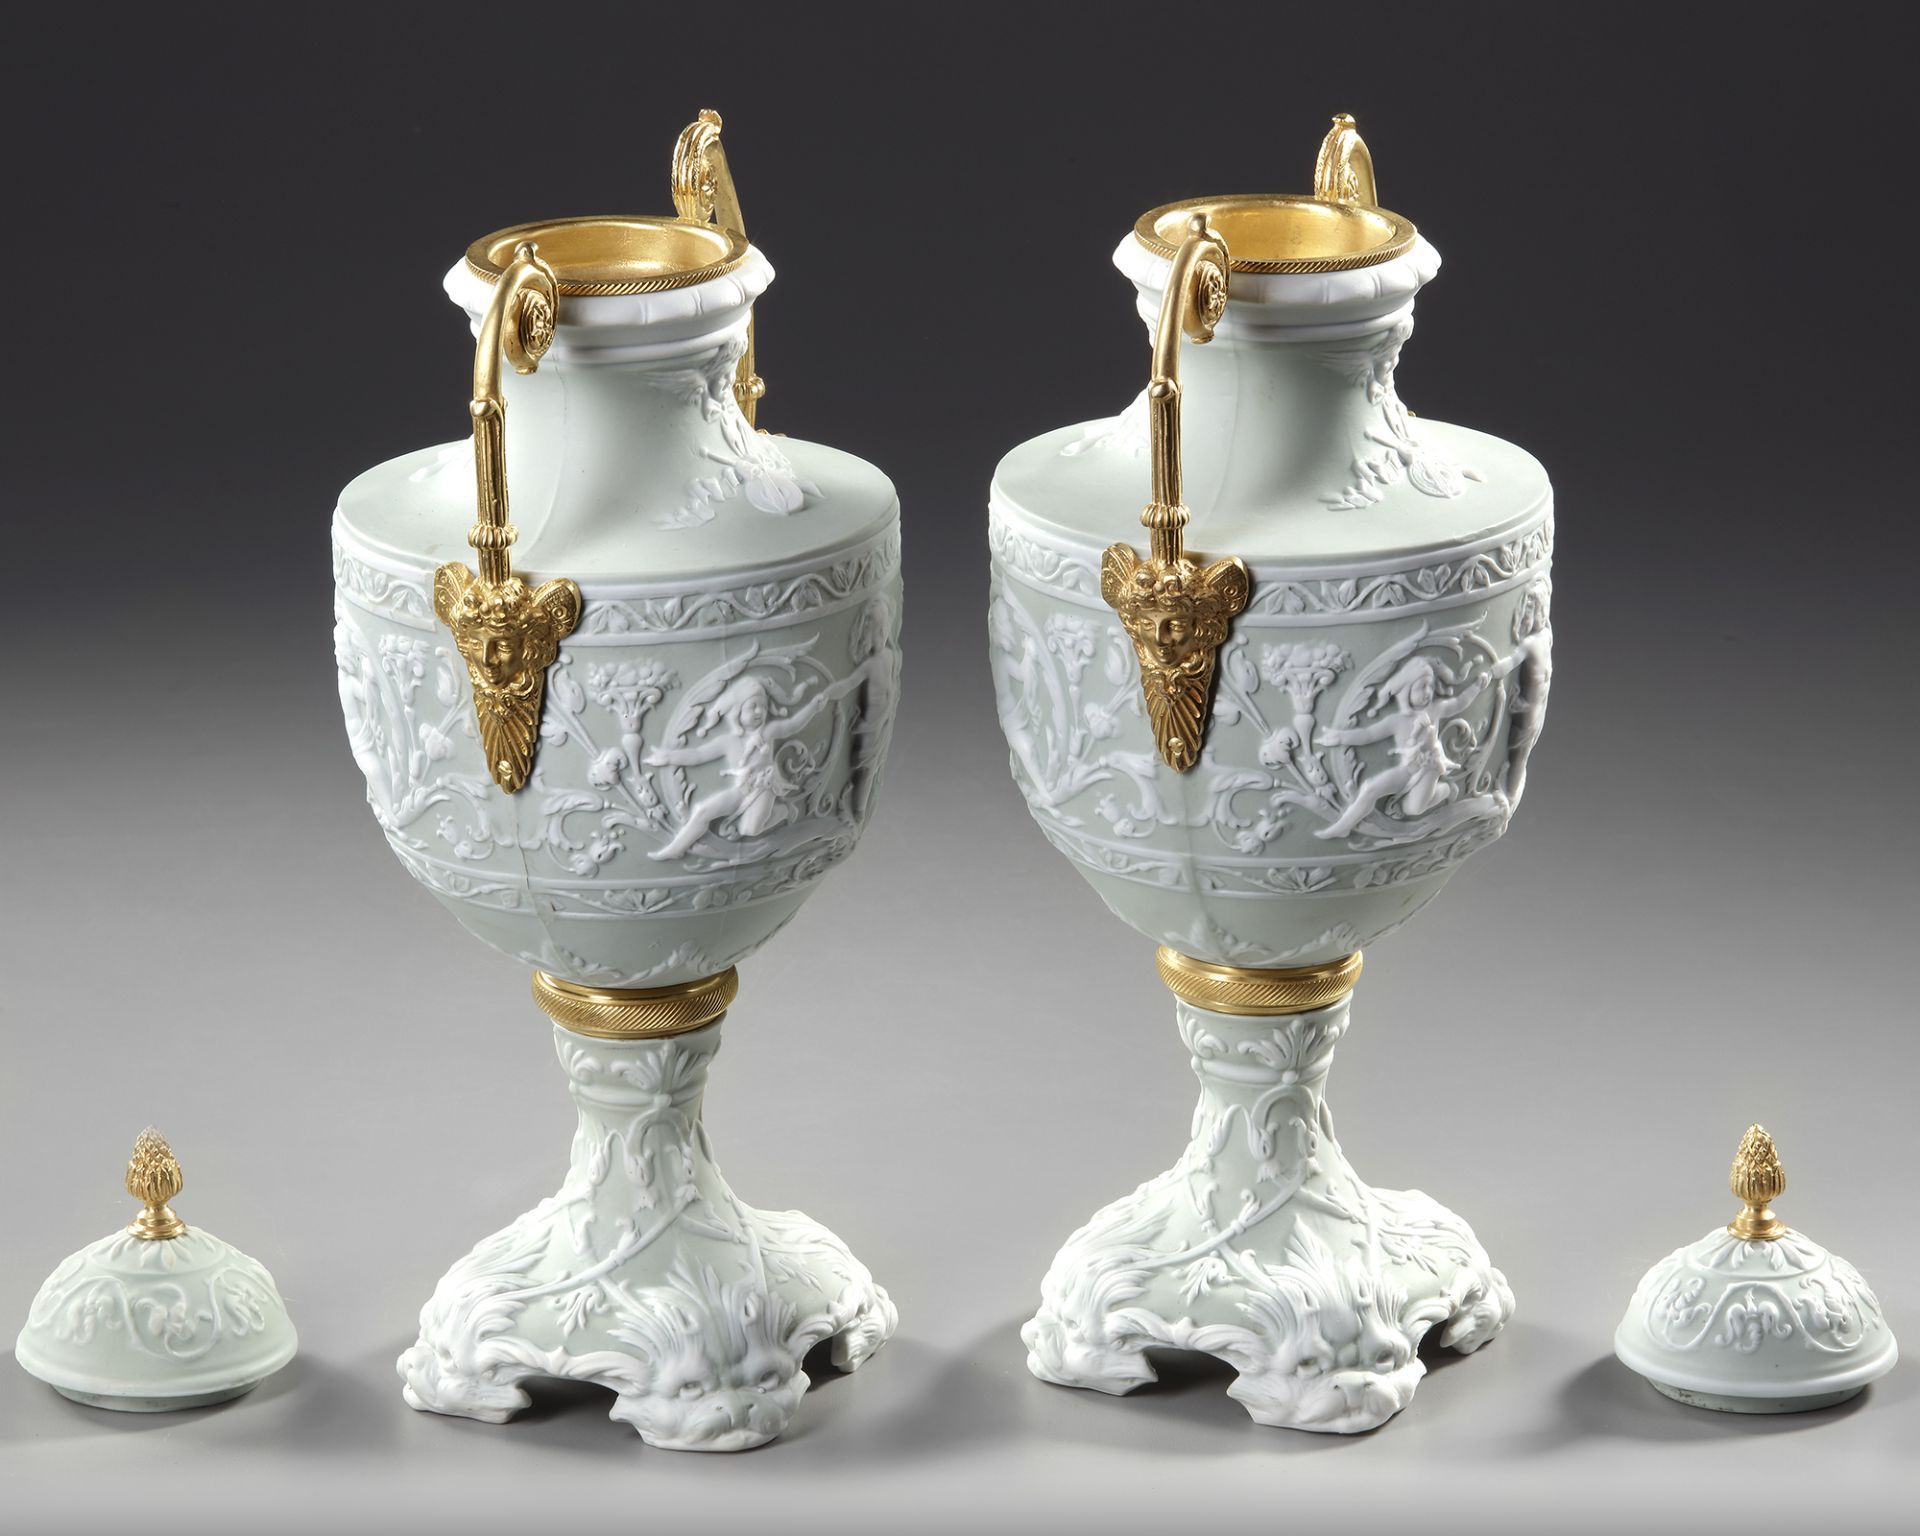 A PAIR OF WEDGWOOD VASES, ENGLAND, 19TH CENTURY - Image 3 of 3